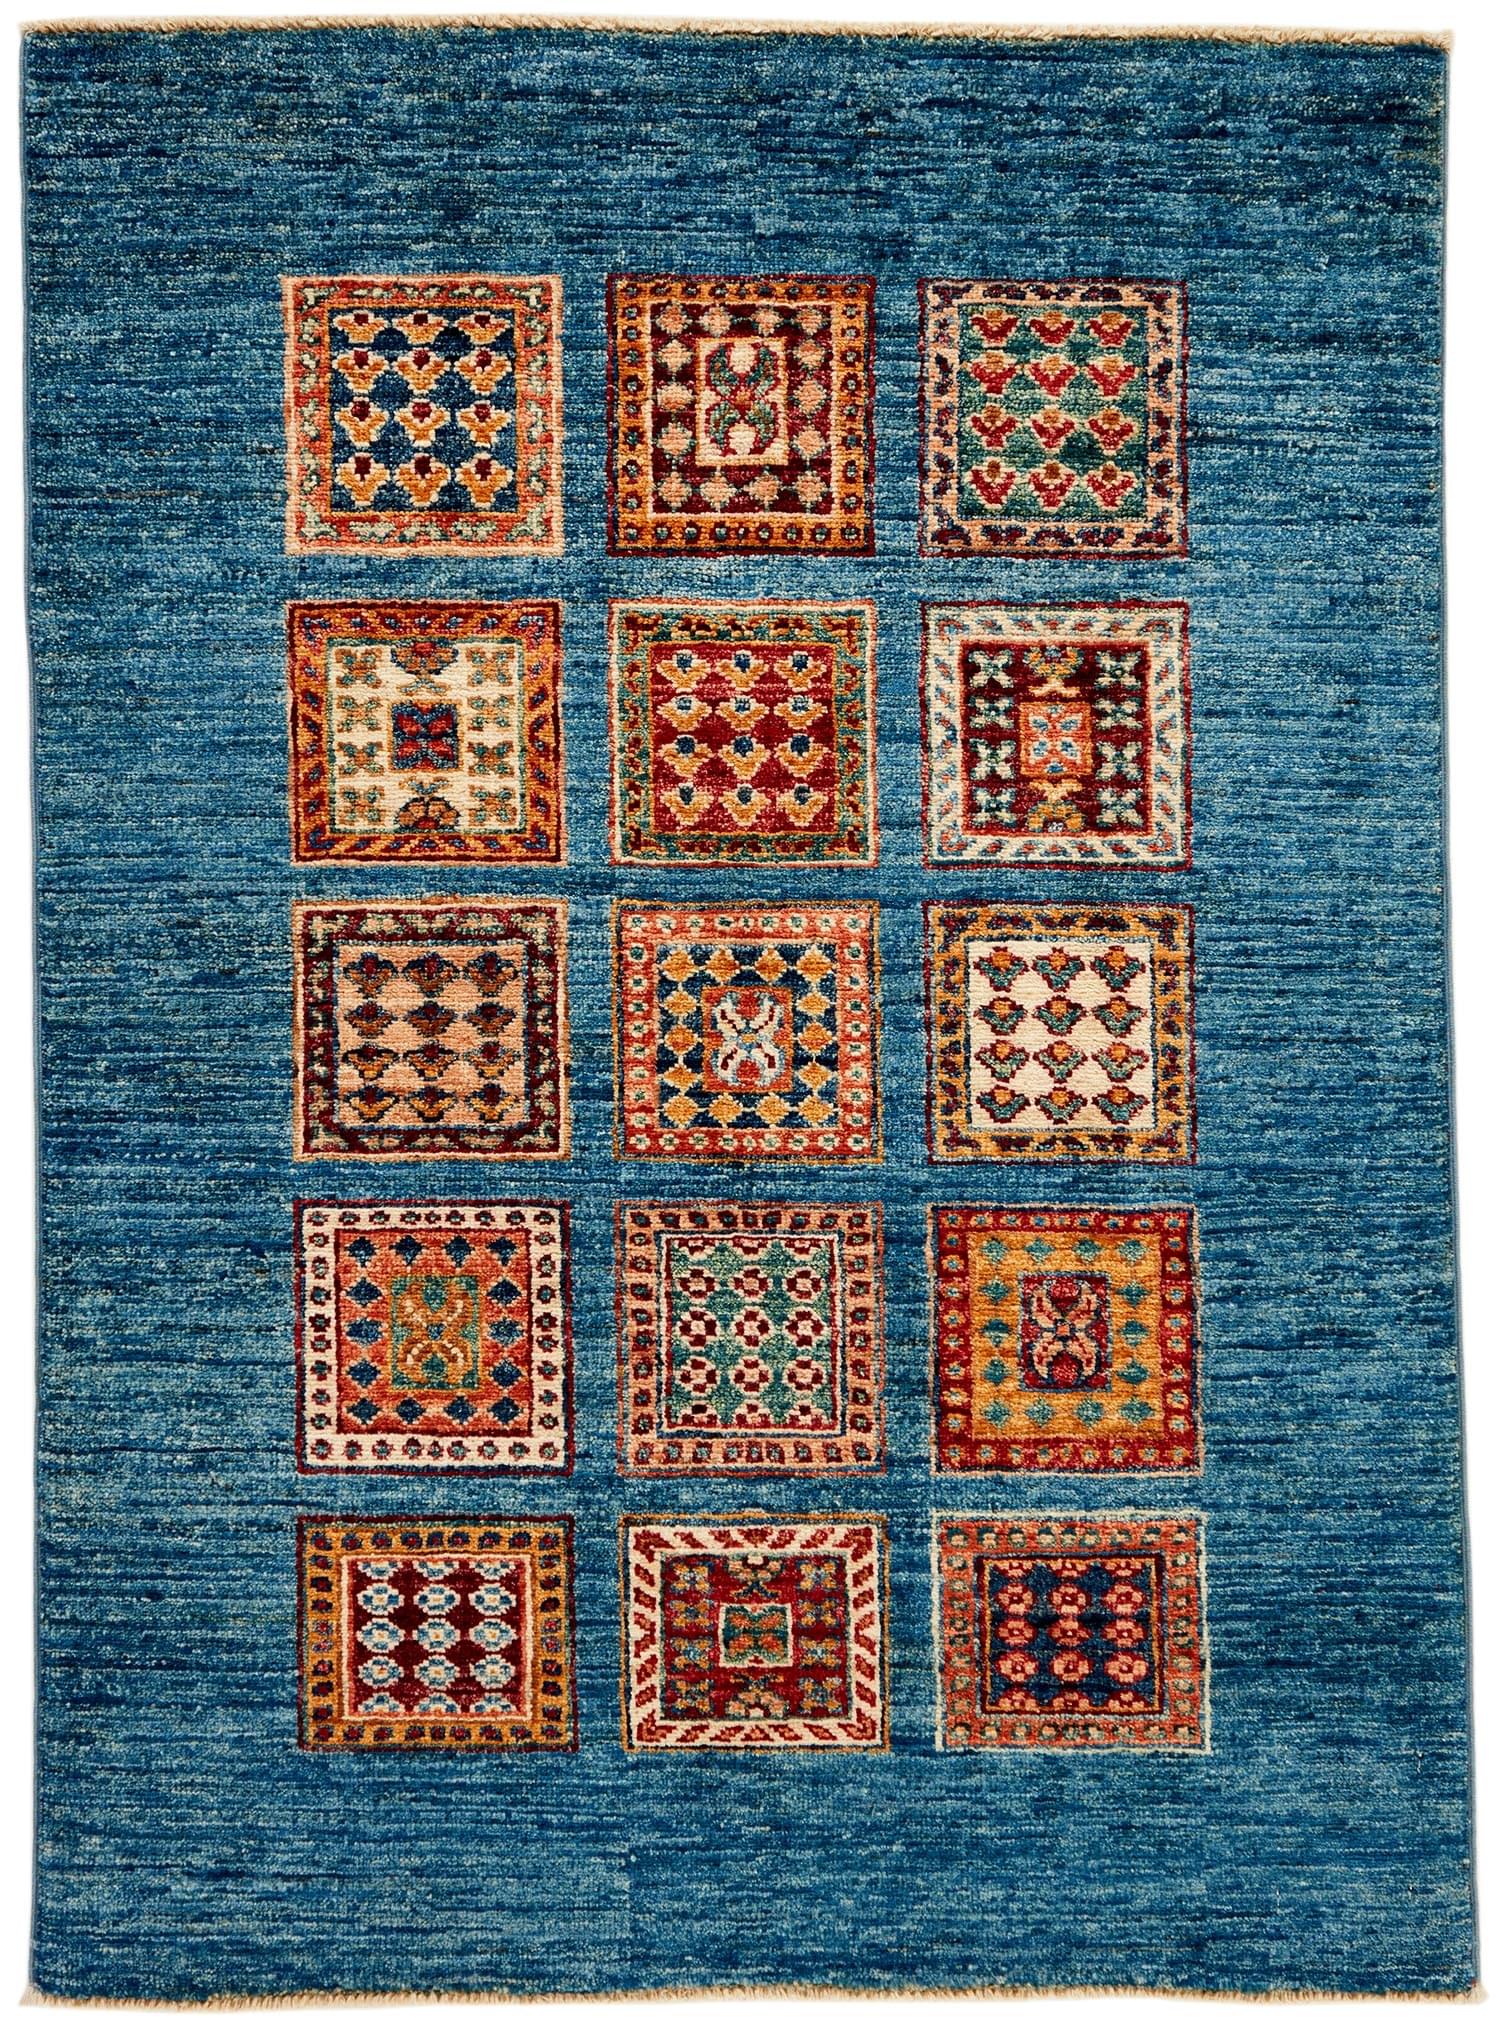 Authentic oriental rug with traditional tile pattern in red, yellow and blue